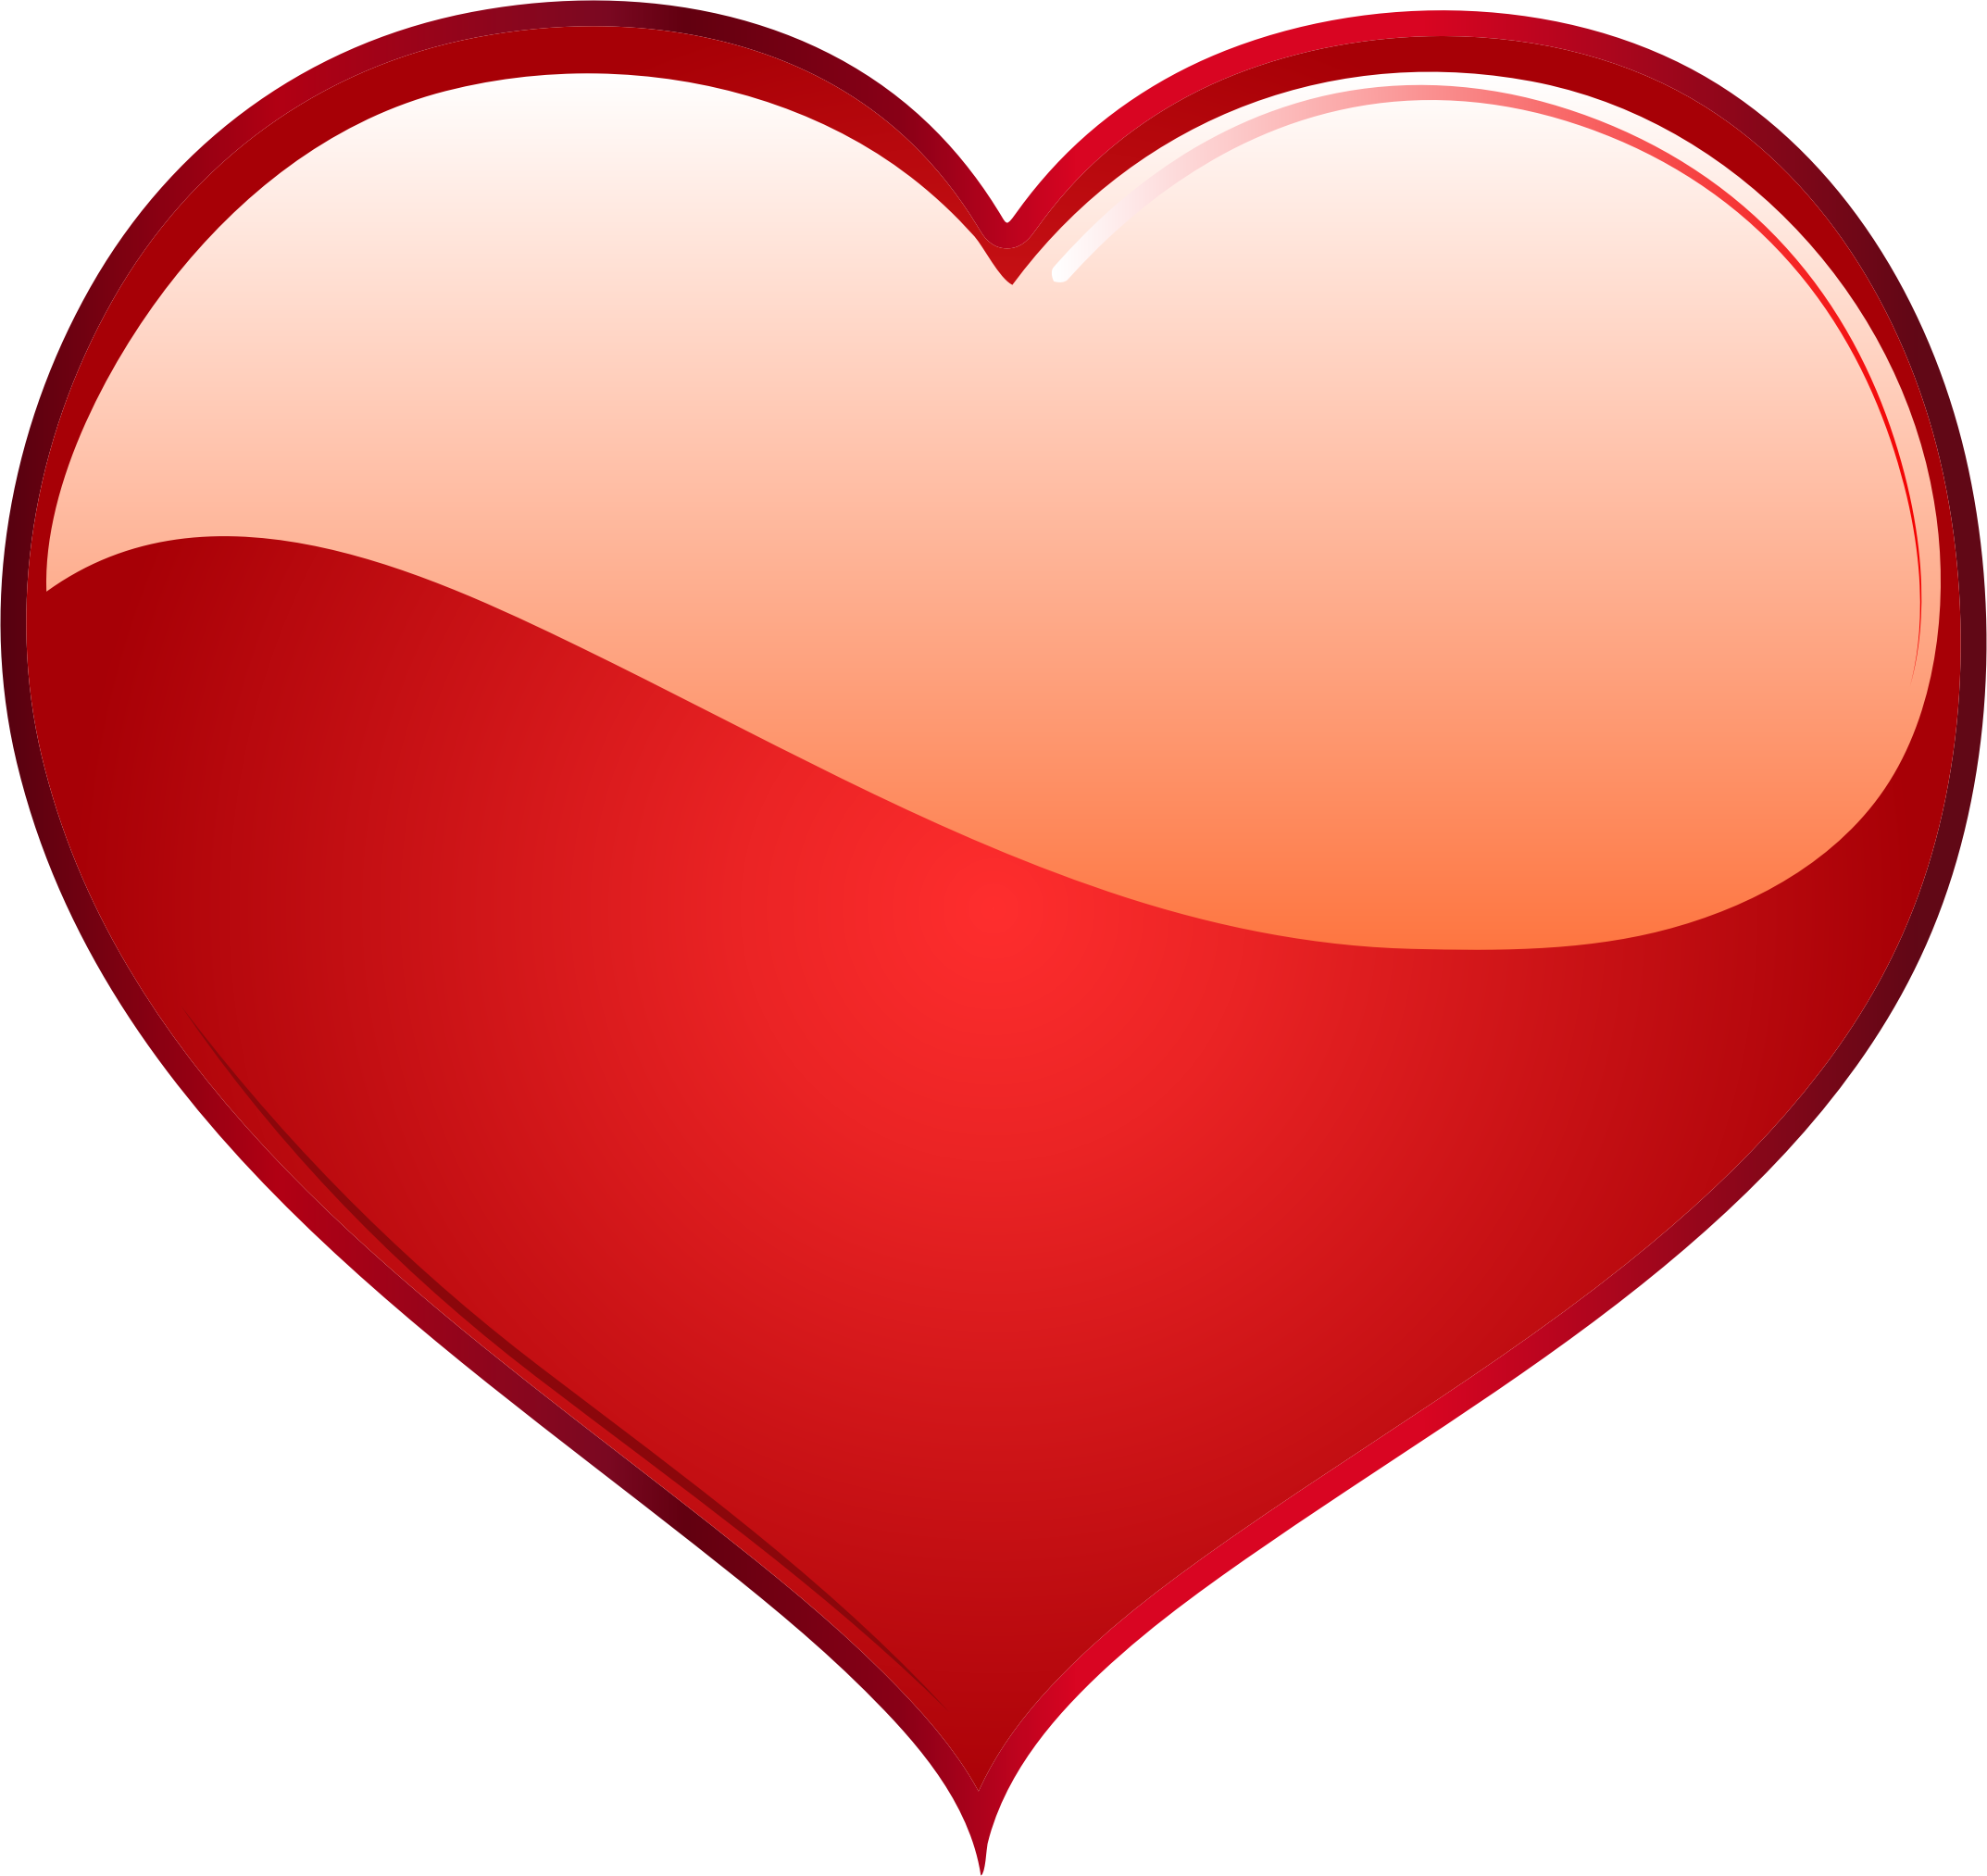 Red Heart Emoji PNG Picture